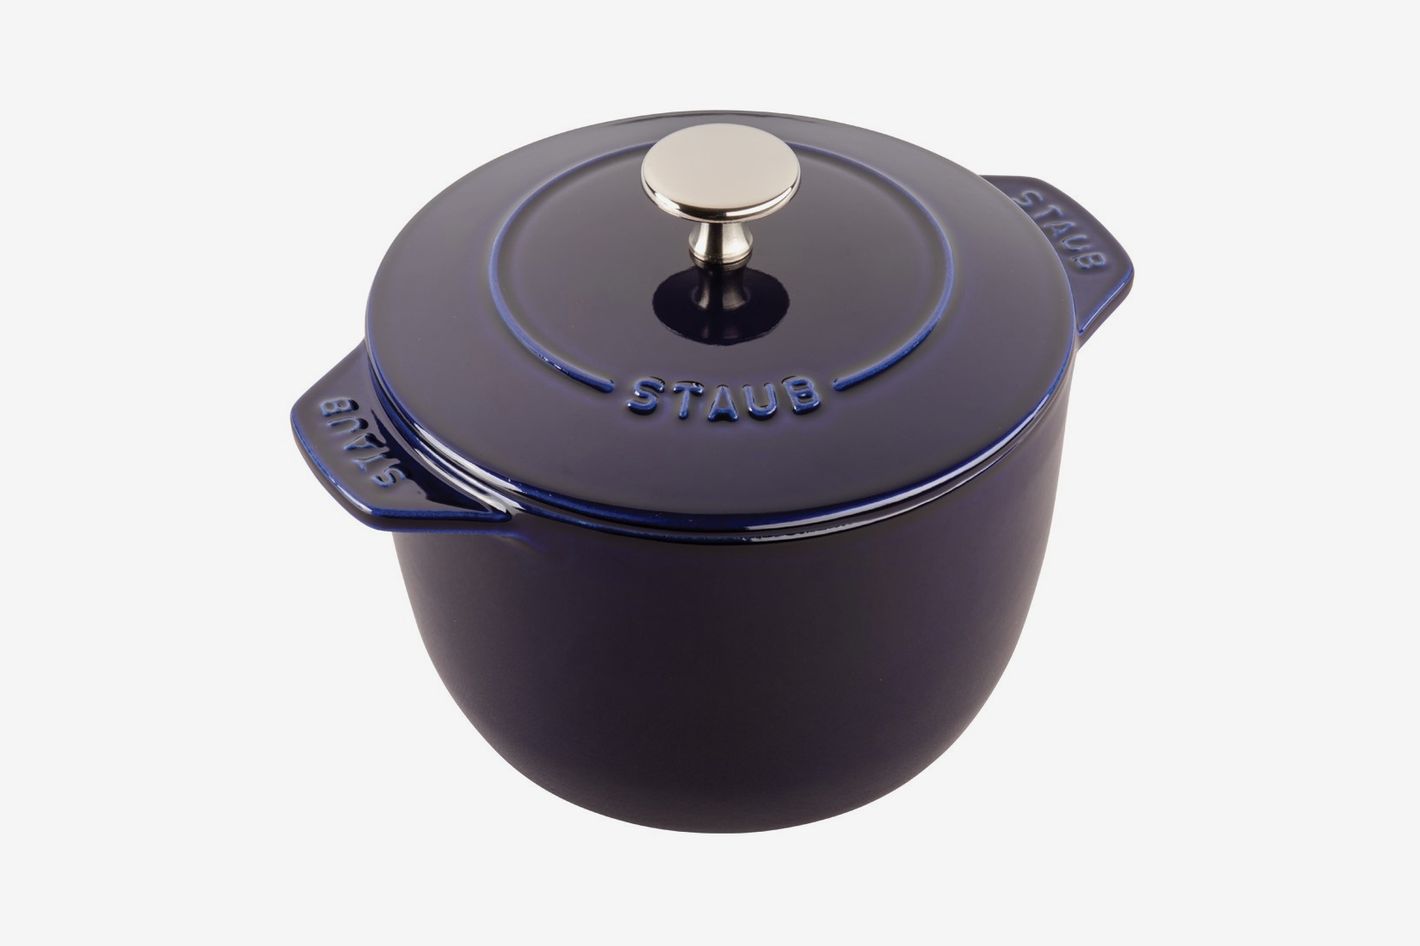 This rice cooker, dreamed up in partnership with French cast iron experts  Staub, is 25% OFF!! The indestructible cast iron, top-notch heat…